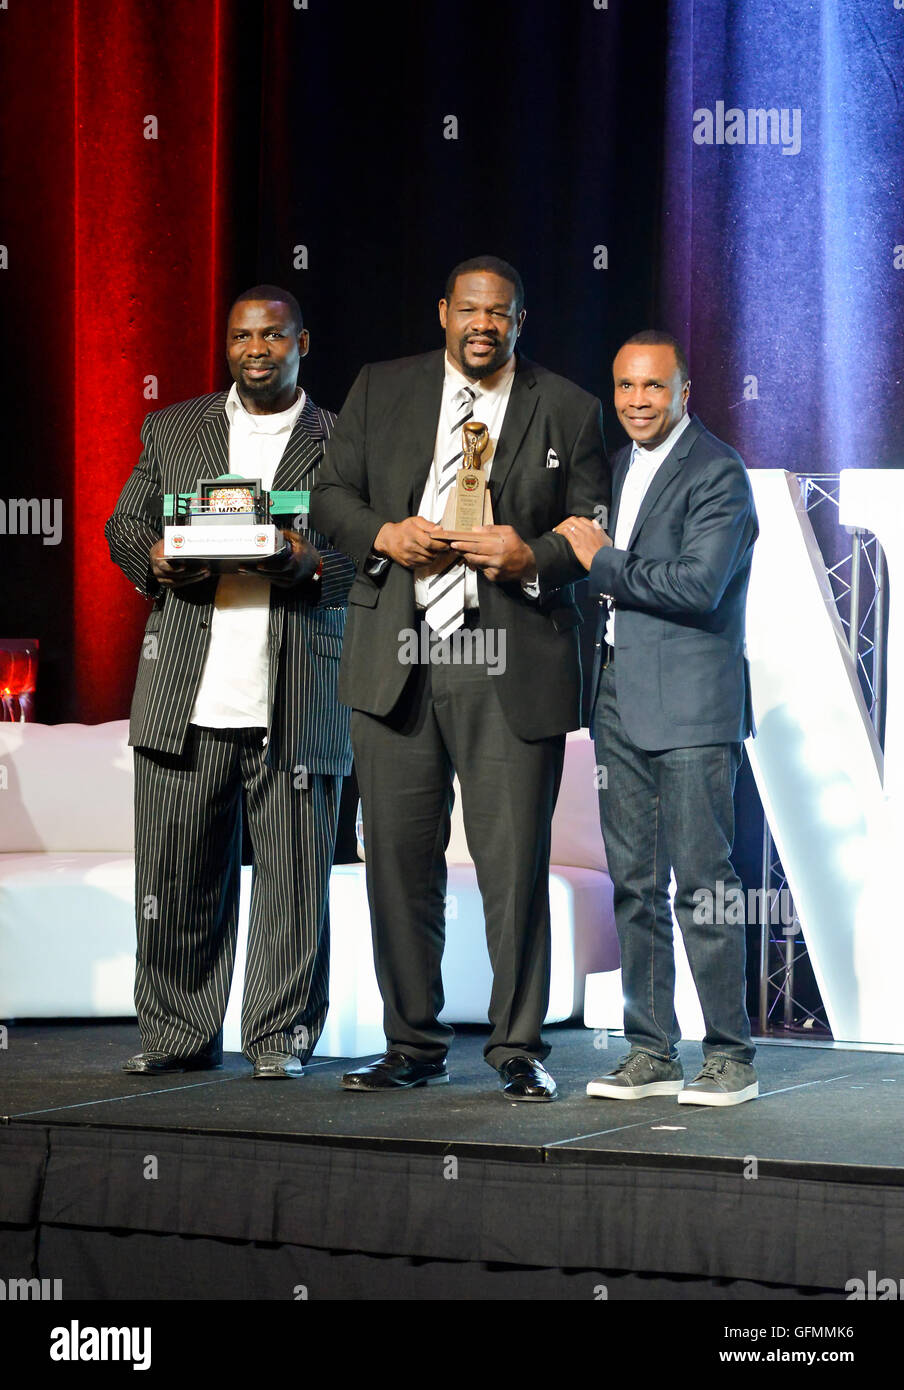 Las Vegas, Nevada, USA. 30th July, 2016. Riddick Bowe honored at the 4th Annual Nevada Boxing Hall of Fame Induction Ceremony. Standing with Sugar Ray Leonard and Hasim Rahman Credit:  Ken Howard/Alamy Live News Stock Photo